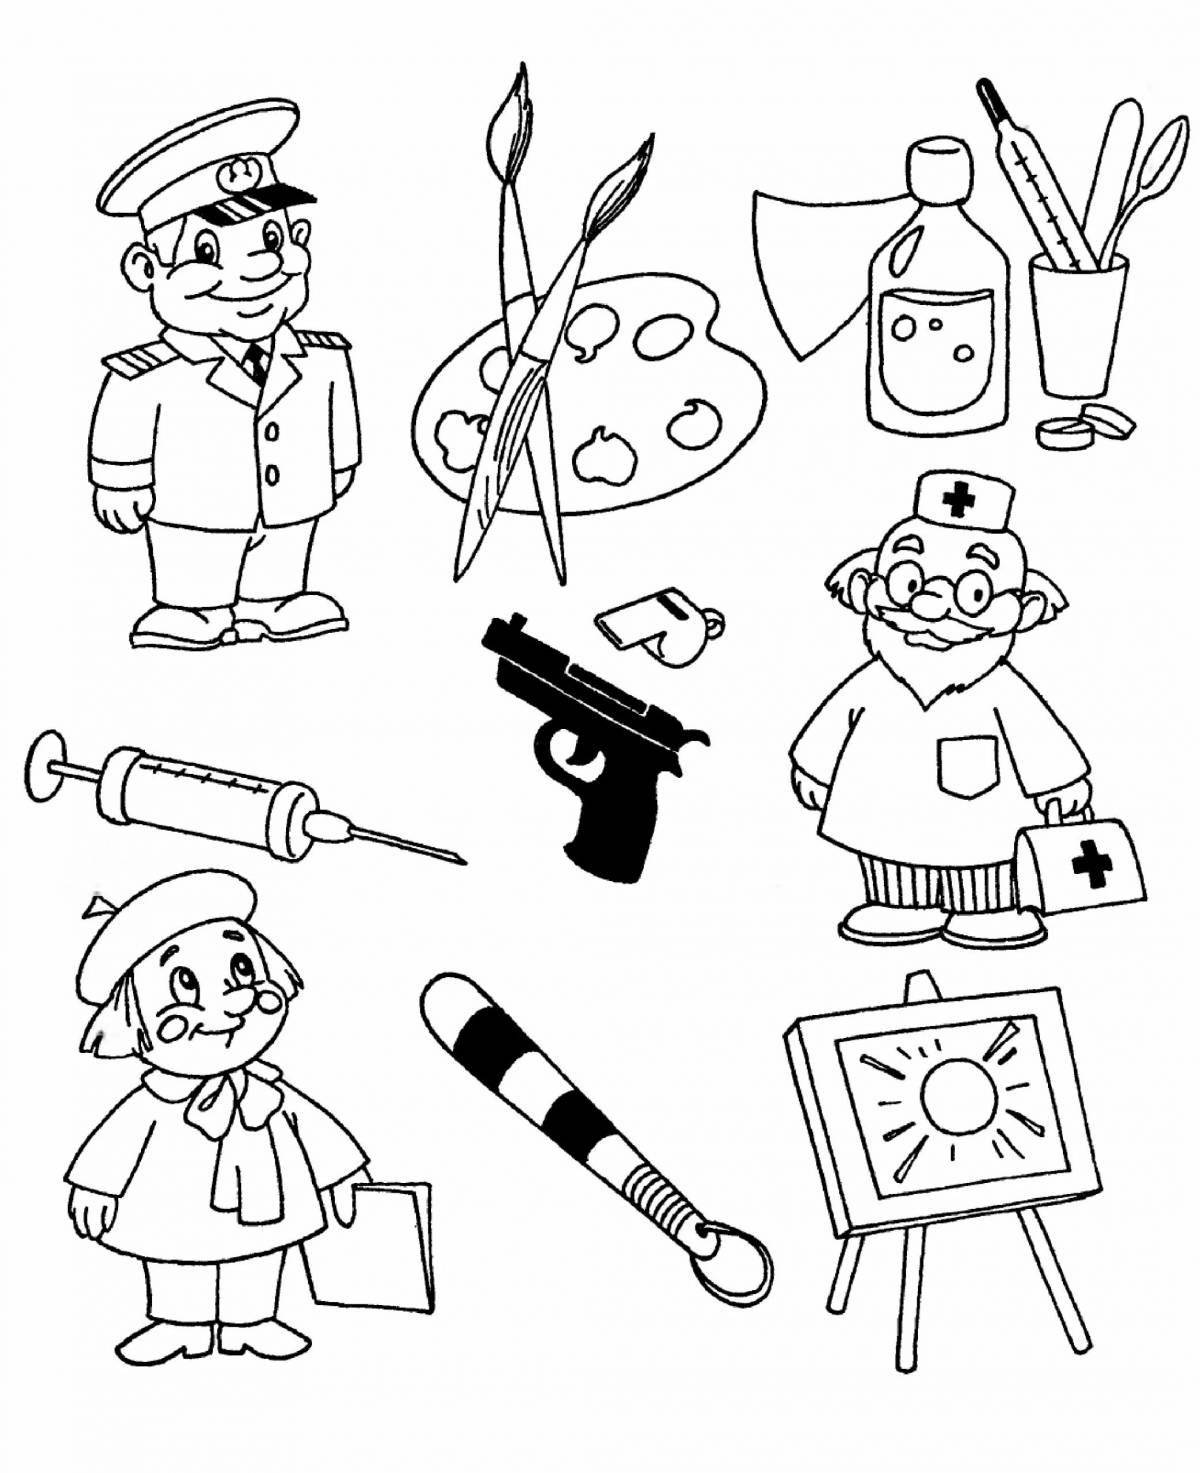 Glowing firefighter coloring page